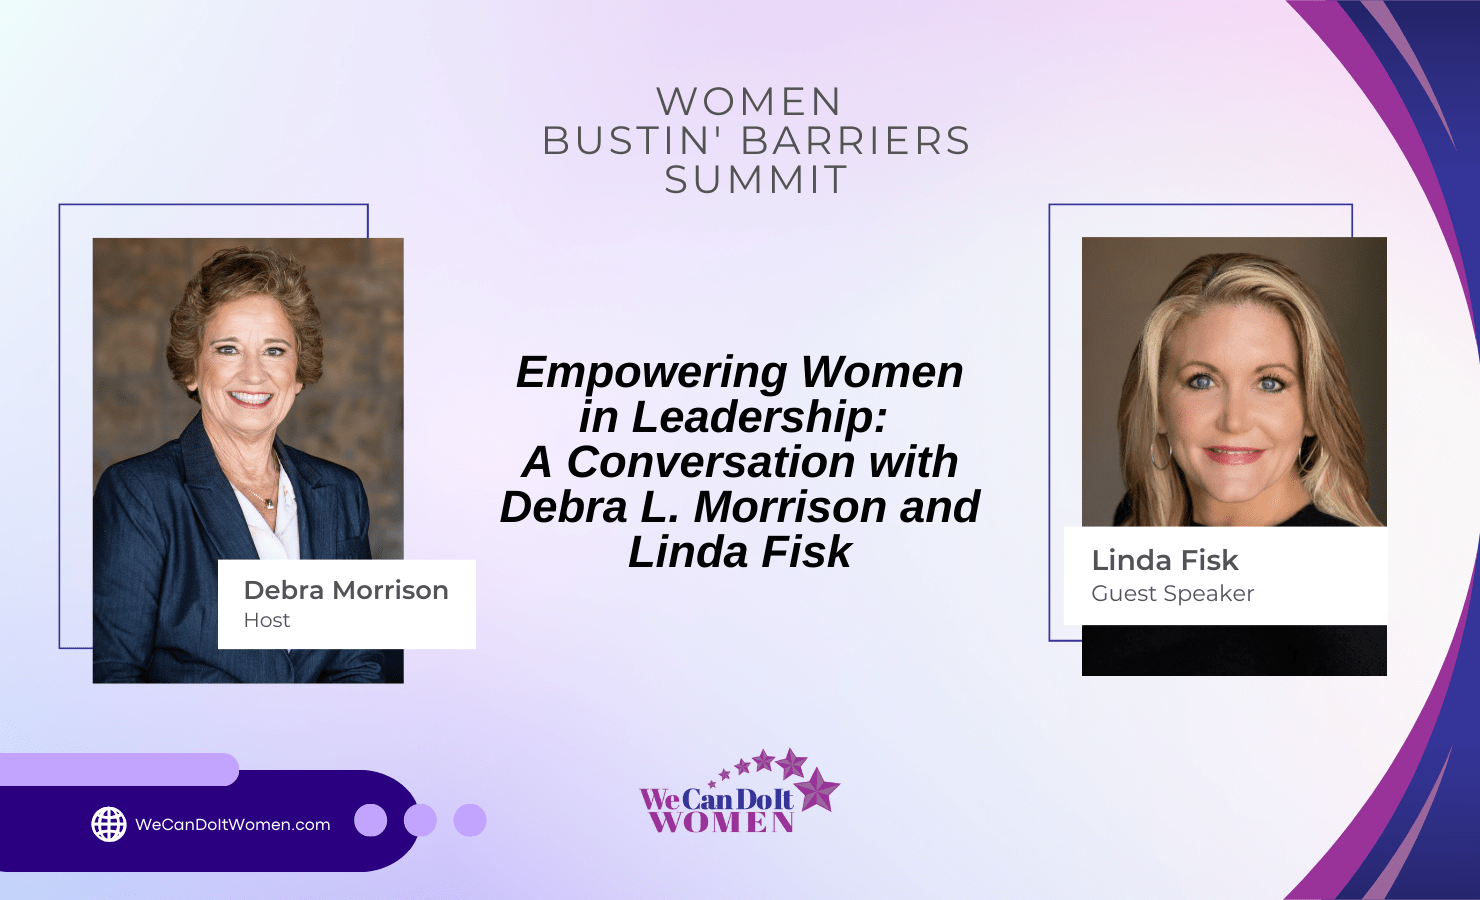 Empowering Women in Leadership: A Conversation with Debra L. Morrison and Linda Fisk